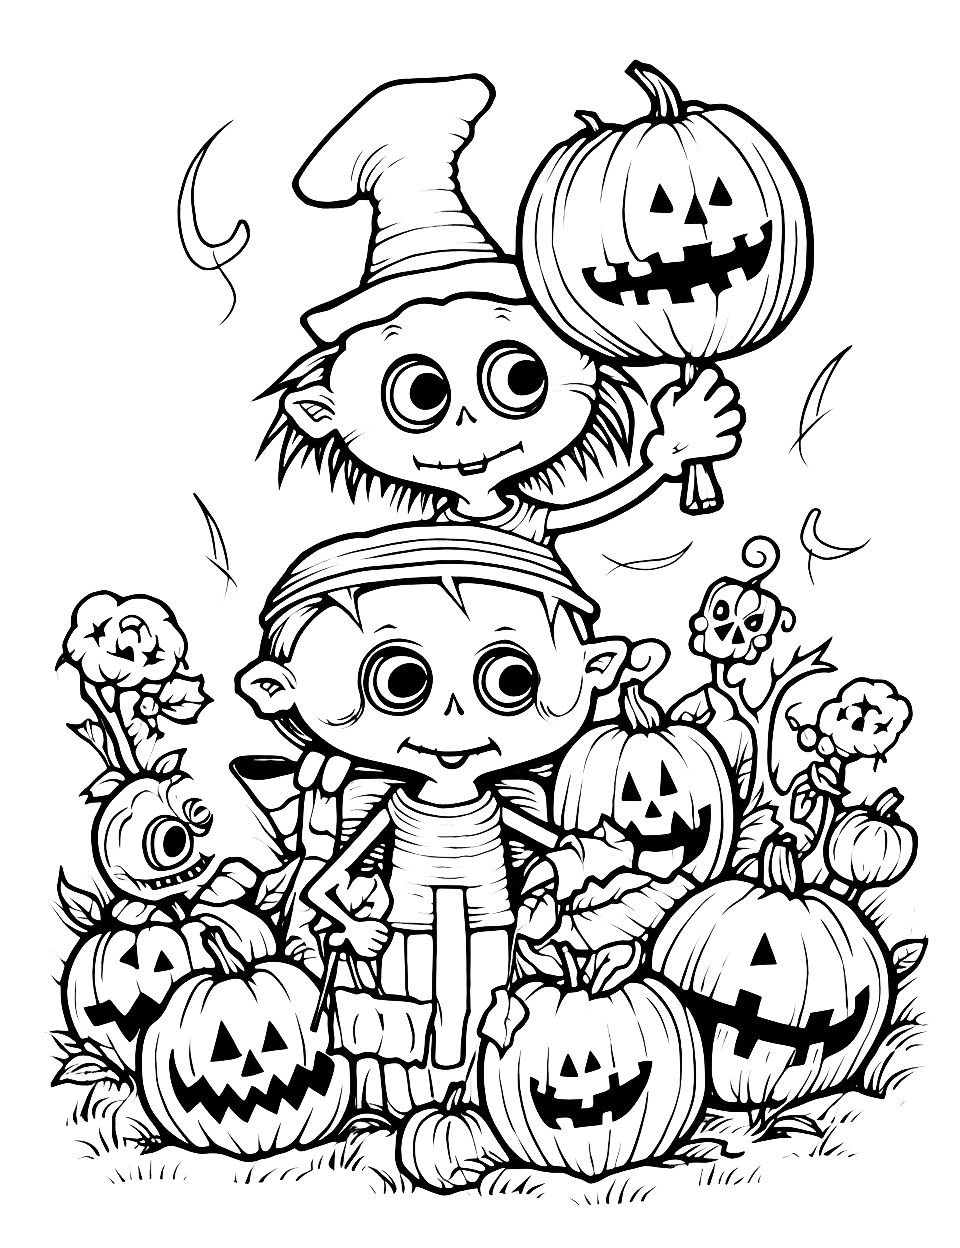 Zombie Picnic Halloween Coloring Page - A humorous scene of zombies having a picnic.